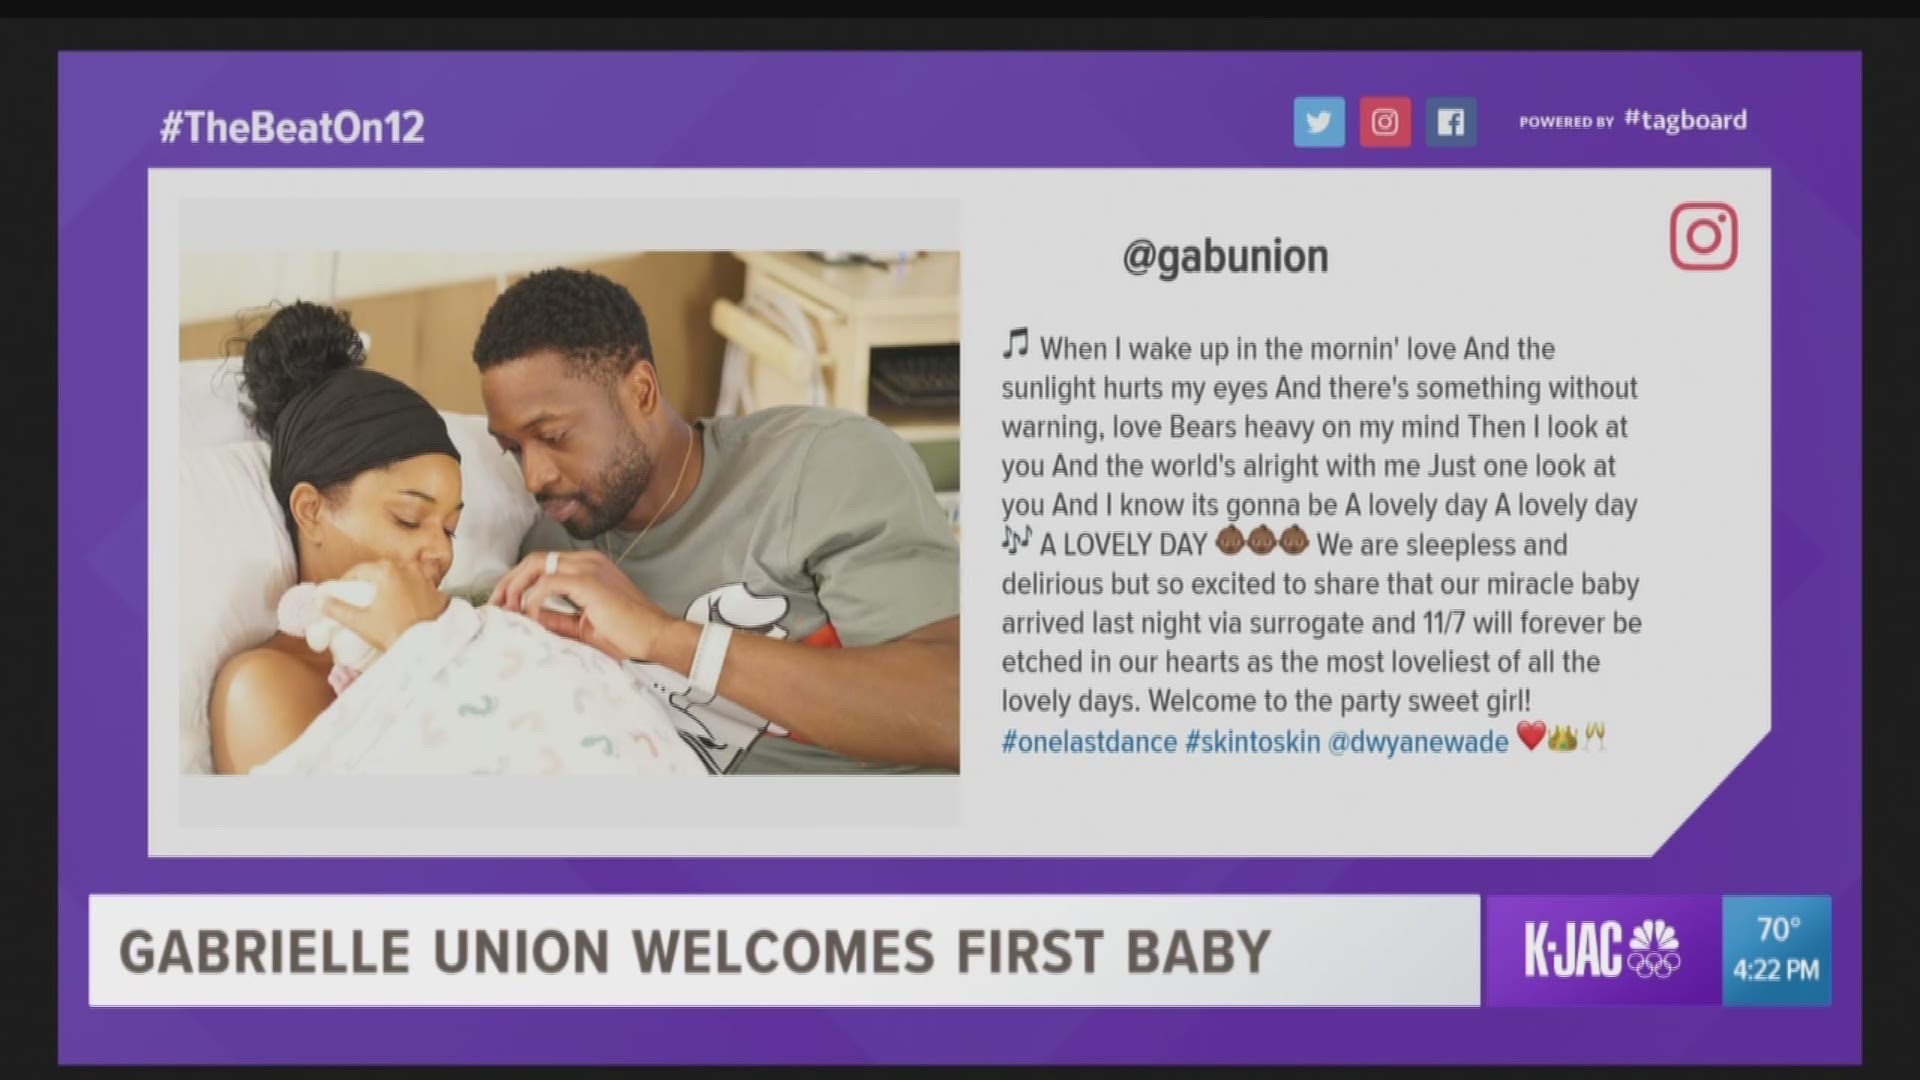 Gabrielle and Swayne used a surrogate. The announcement was made on Instagram.